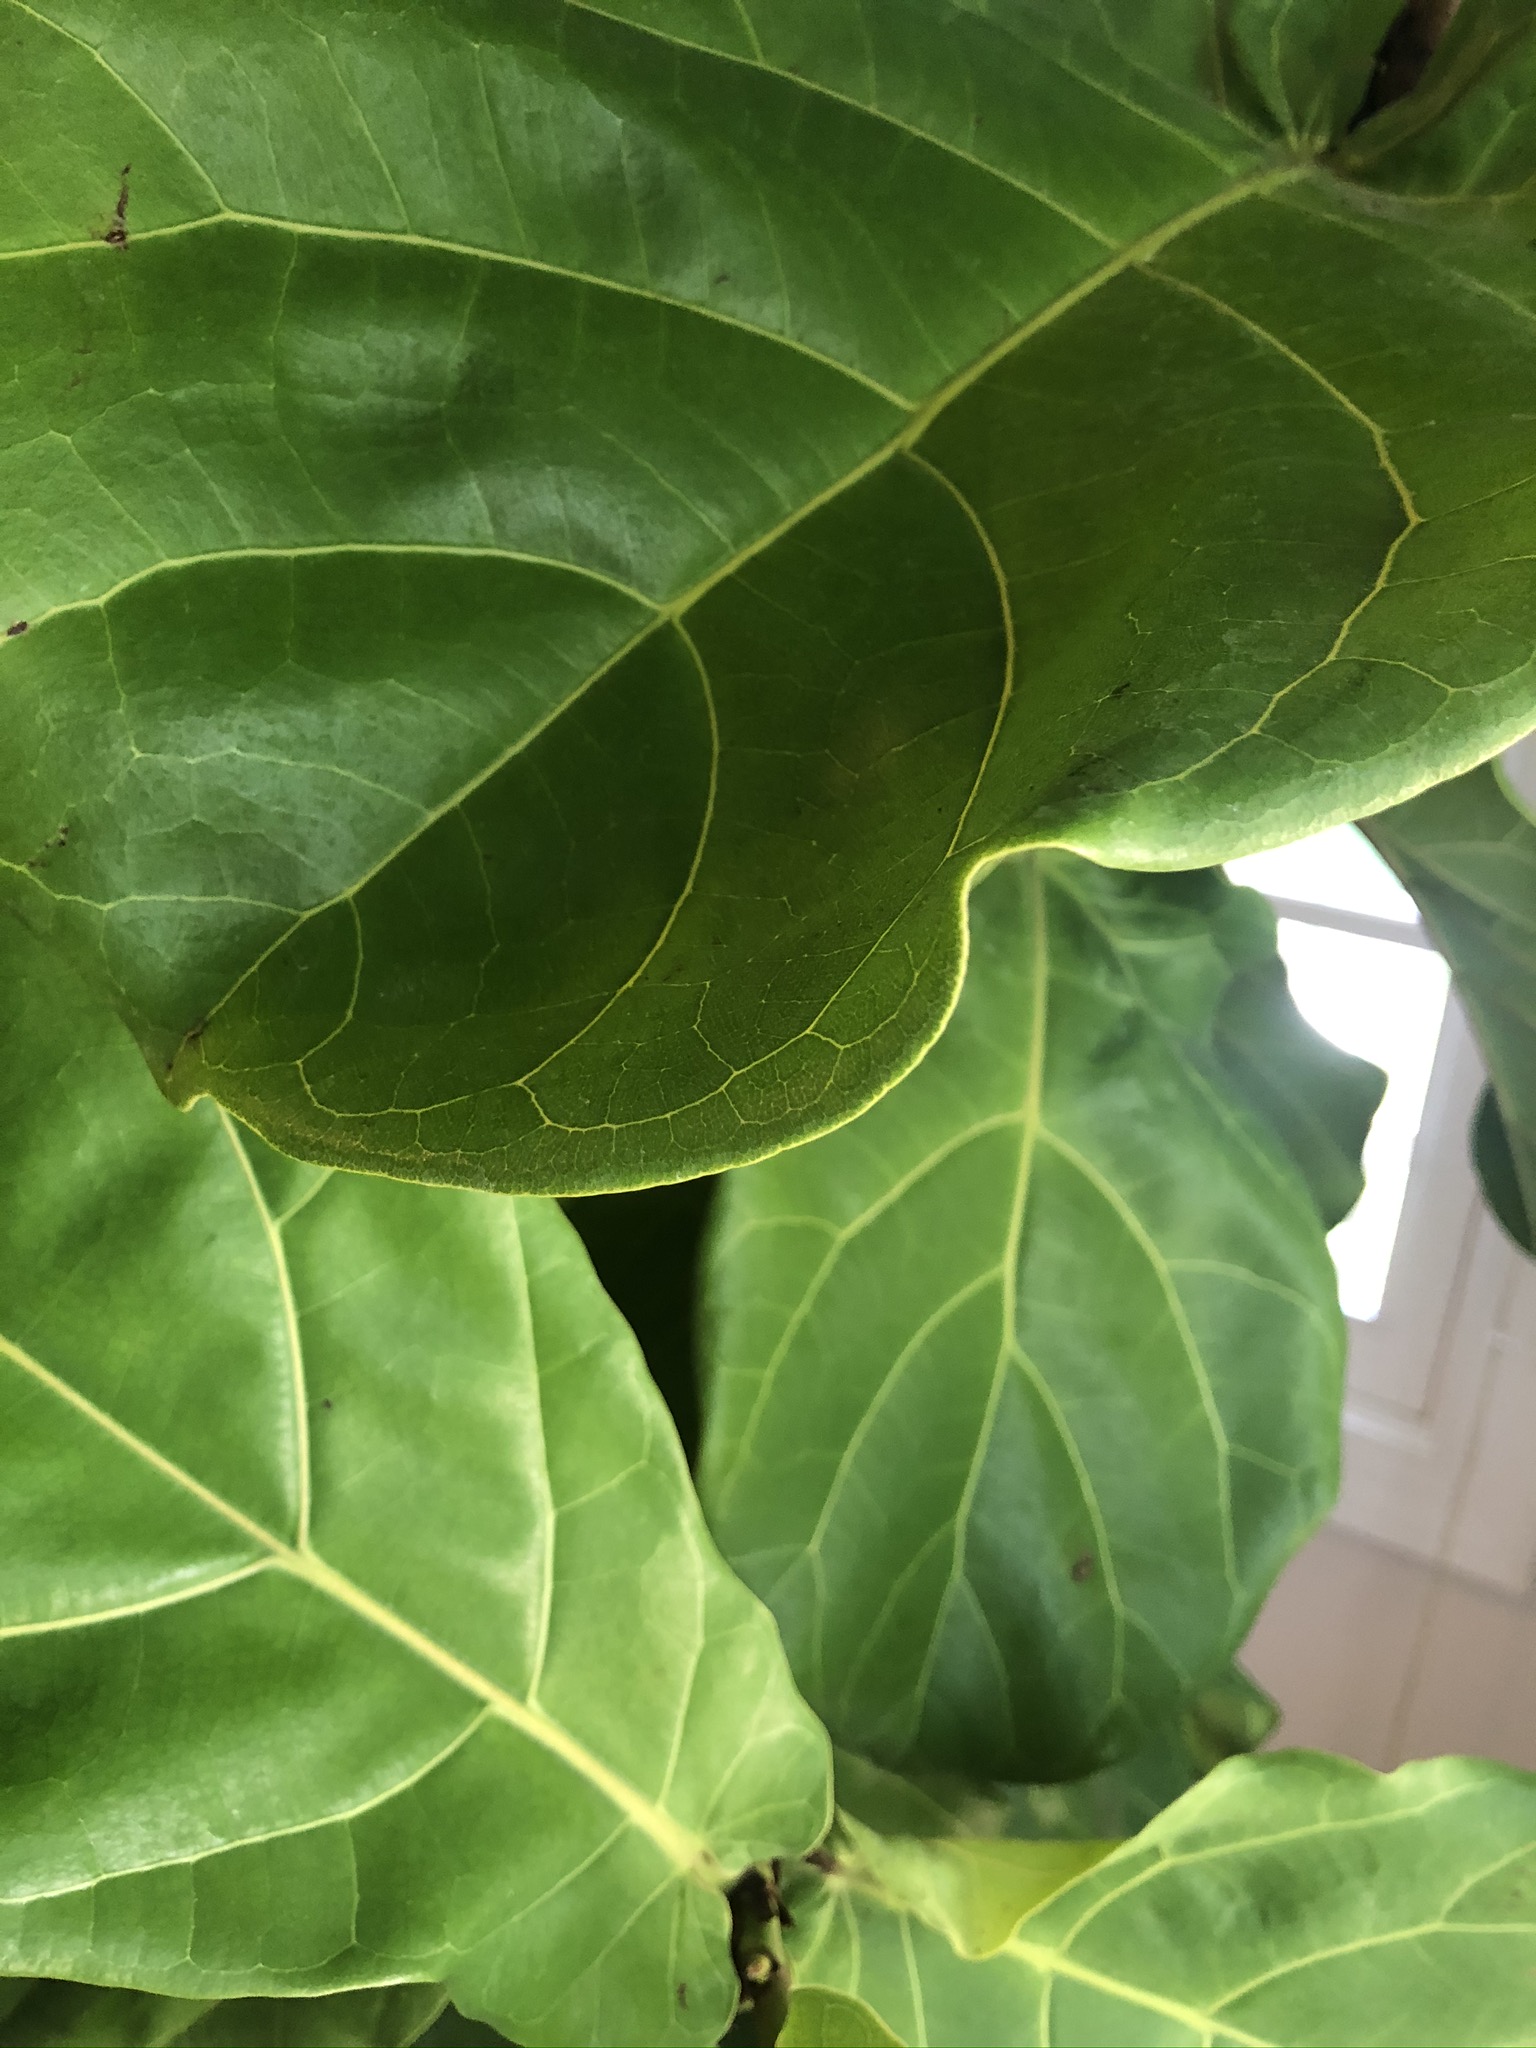 How to Use a Moisture Meter to Know When to Water Your Fiddle Leaf Fig